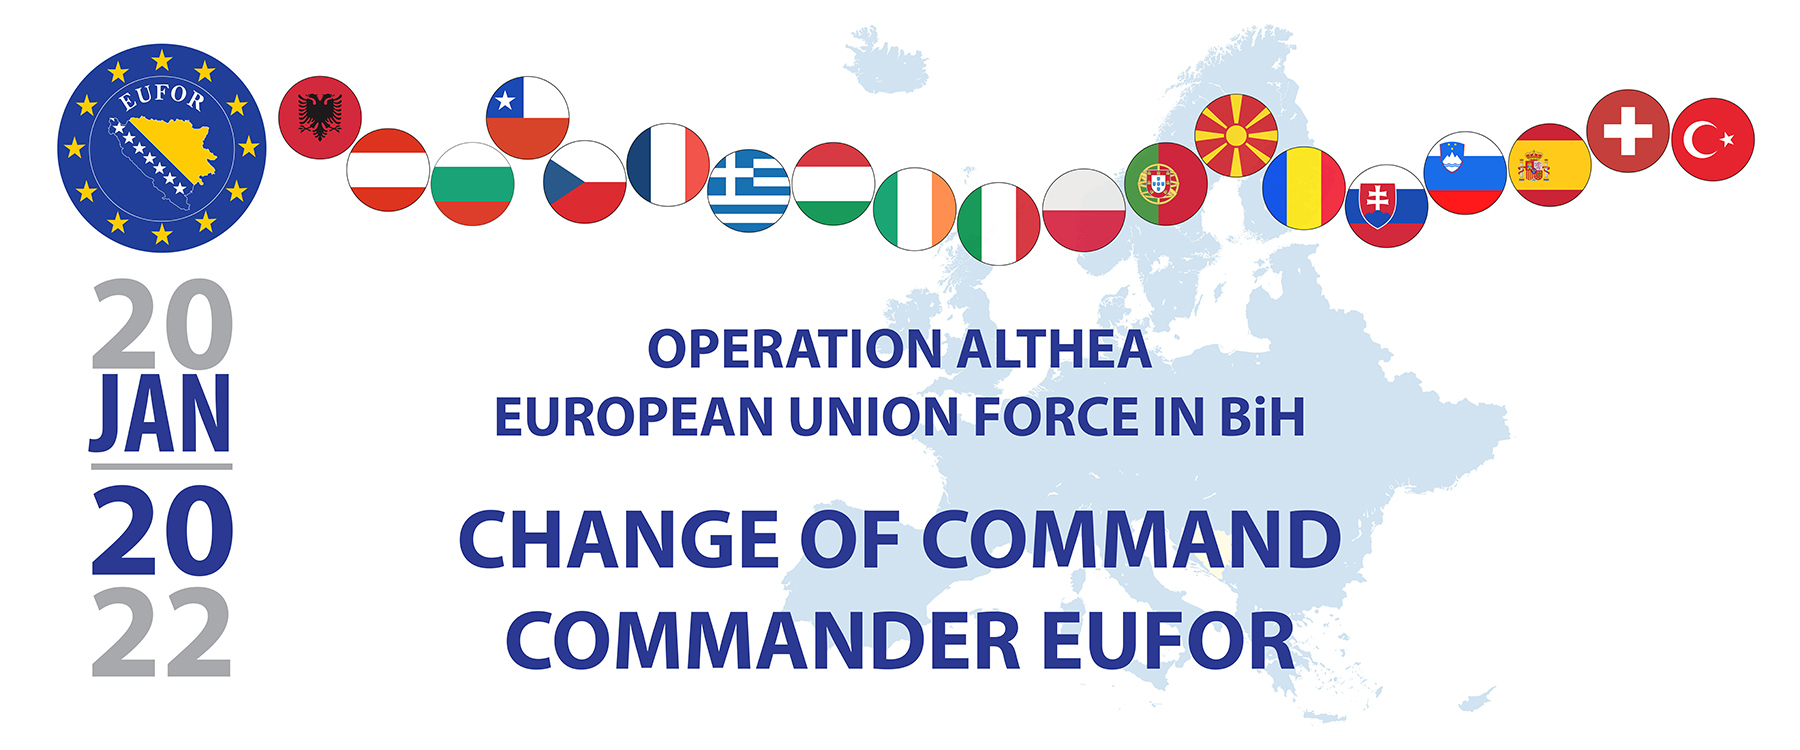 Invitation to all Media Representatives to the EUFOR Change of Command Ceremony